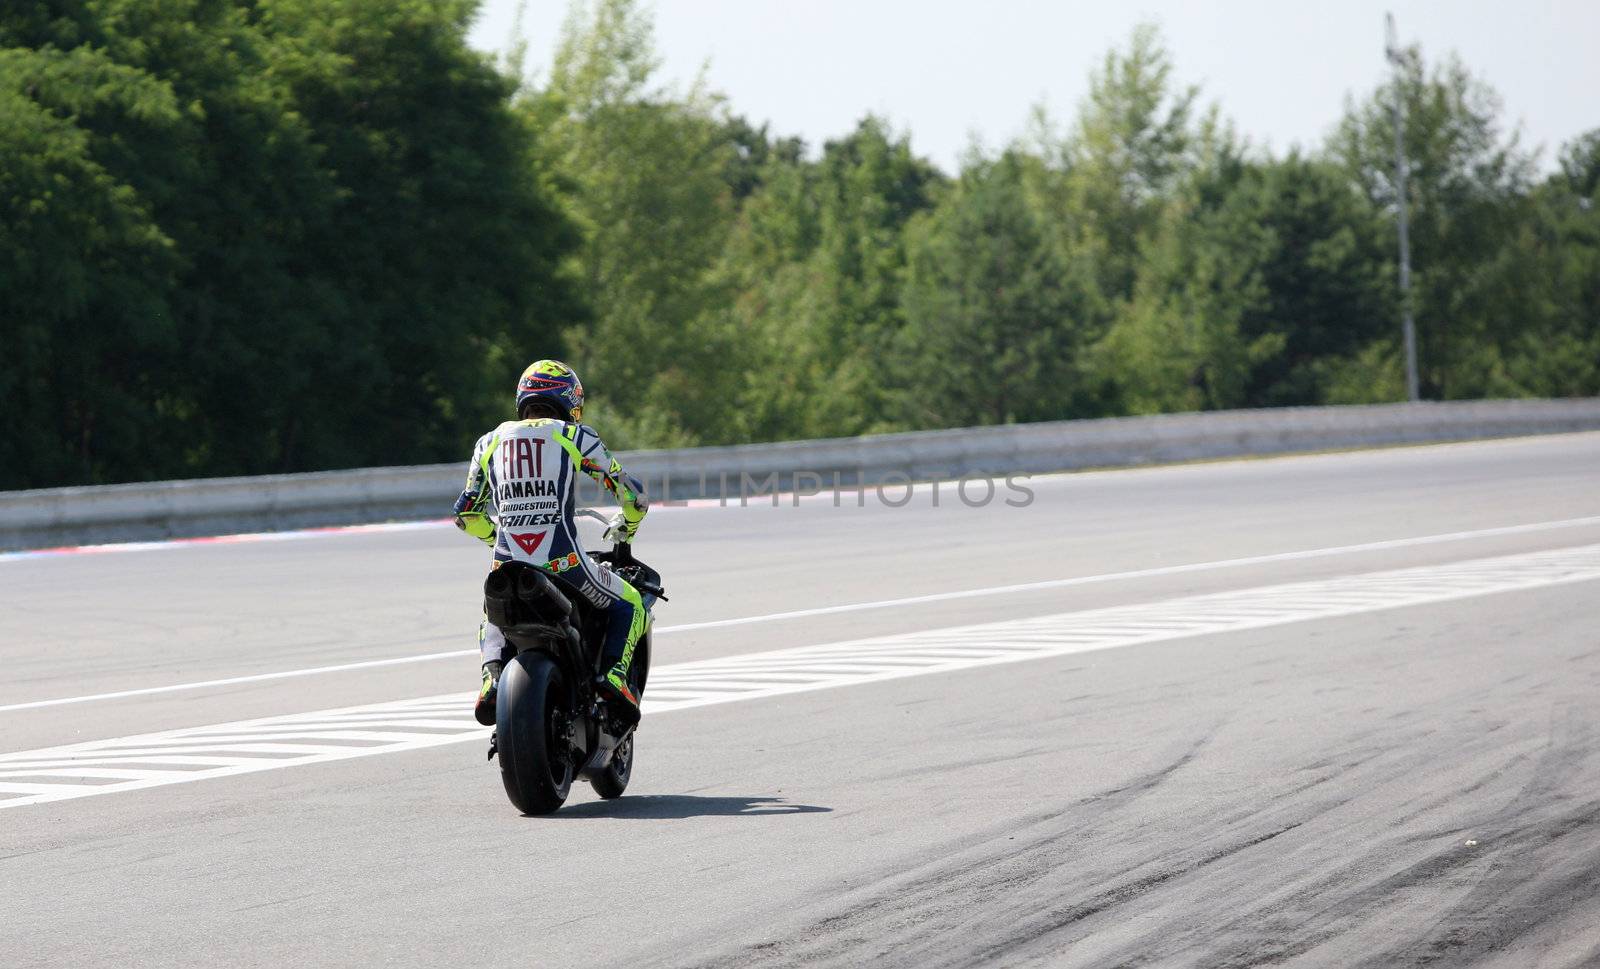 Valentino Rossi, who in early June in Italy Mugello GP suffered an fracture of the leg is testing at Masaryk Circuit on 12 July 2010, in Brno, Czech republic. by haak78